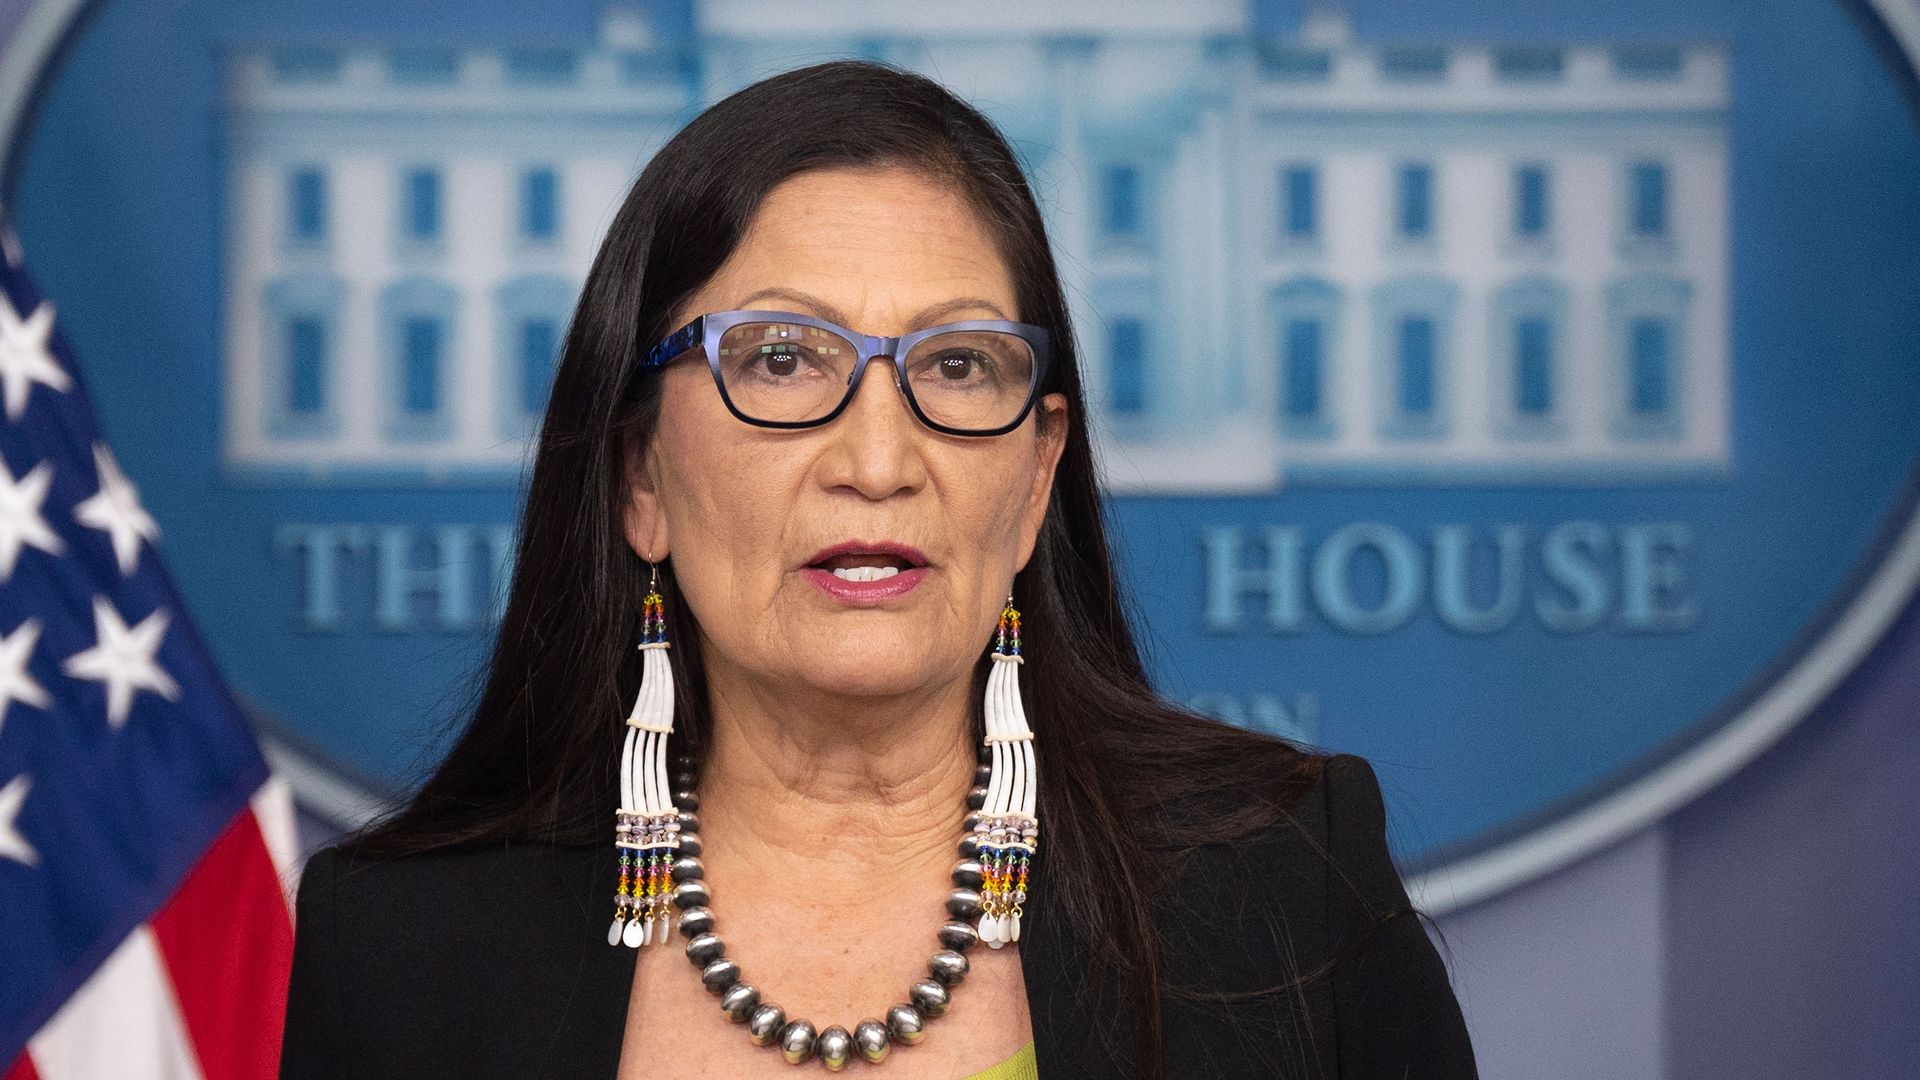 Secretary of the Interior Deb Haaland speaking at the White House on April 23.